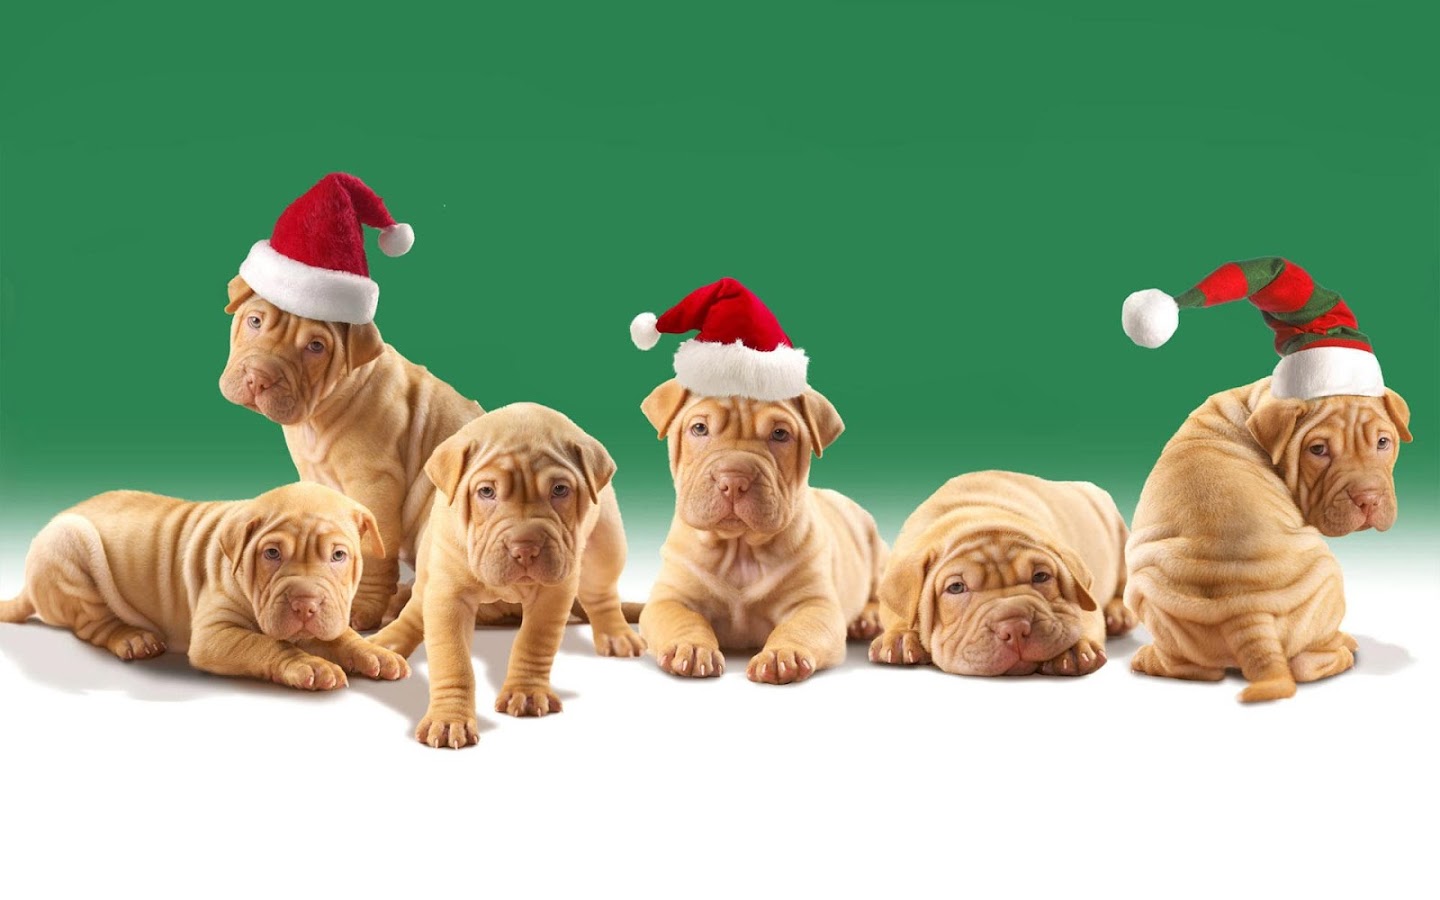 Pet Christmas Wallpaper HD - Android Apps on Google Play